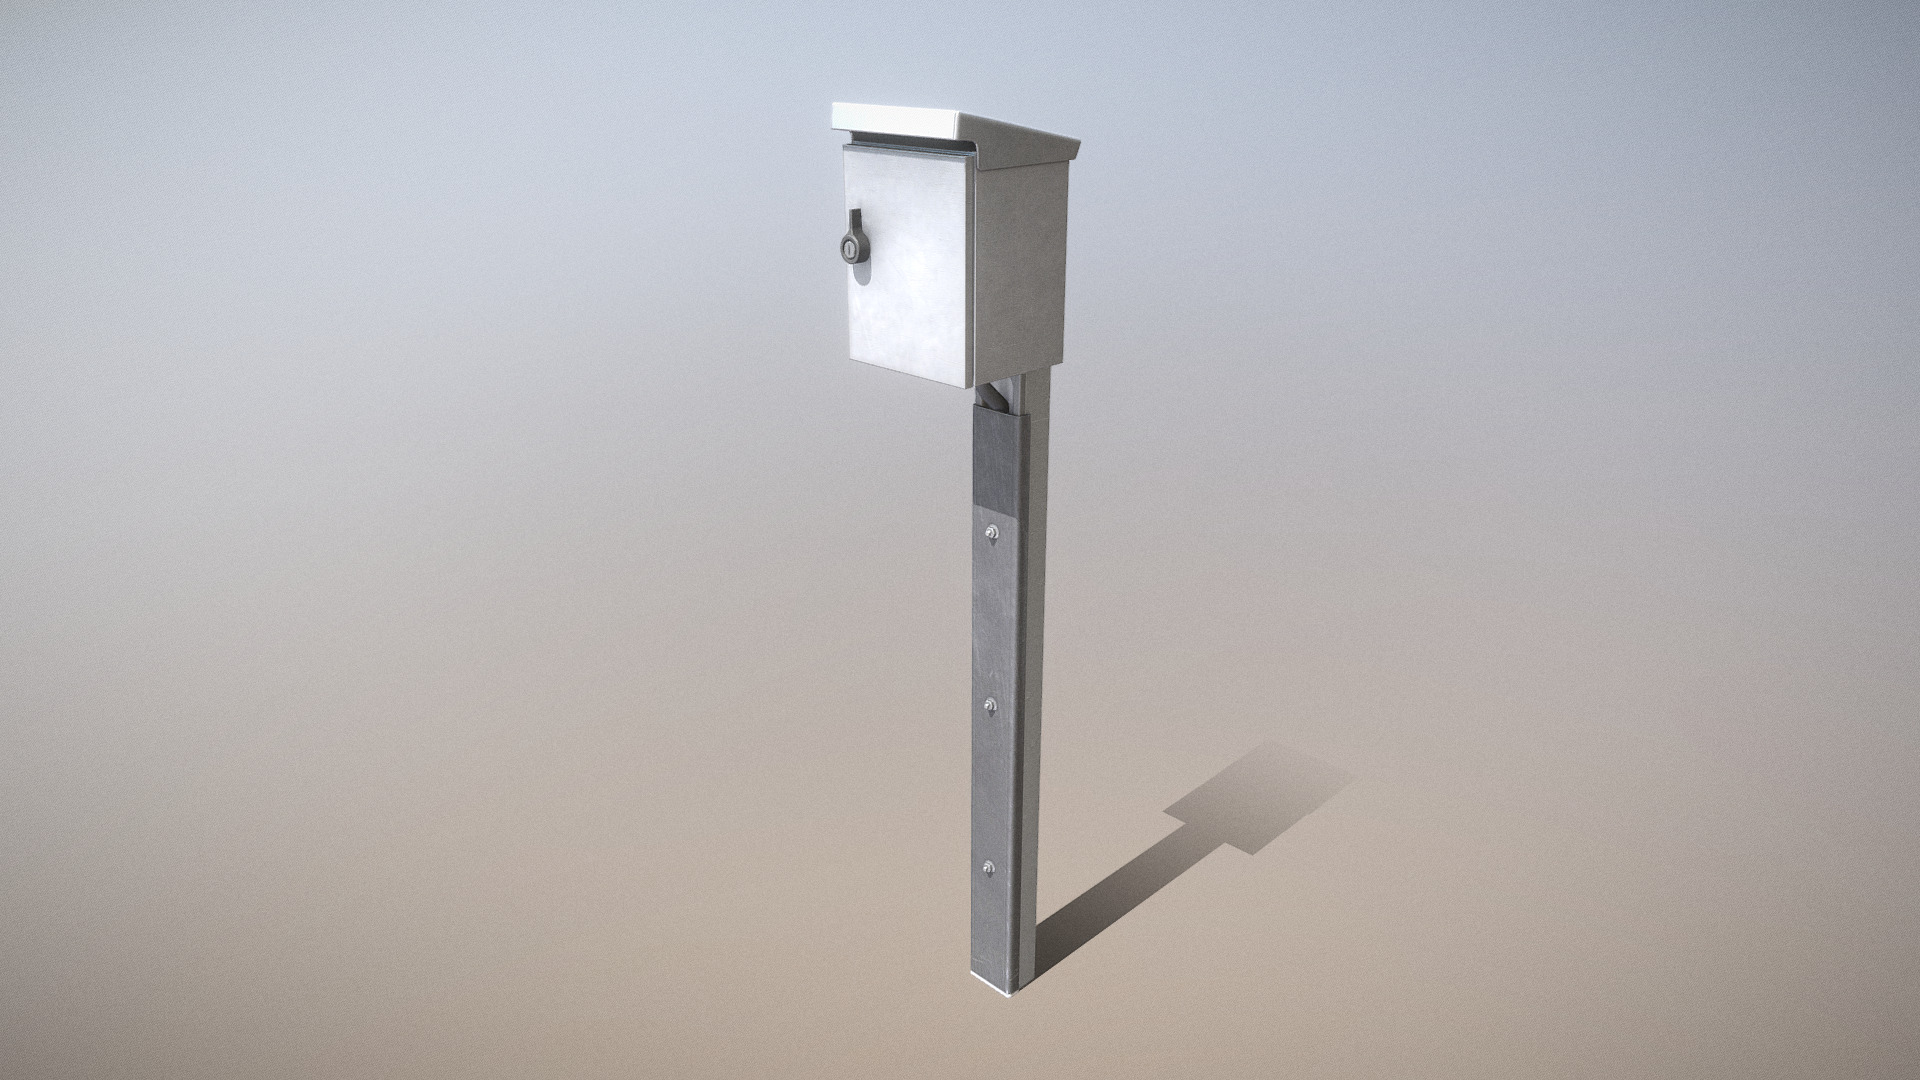 3D model Electricity Display Control Element 1 Low-Poly - This is a 3D model of the Electricity Display Control Element 1 Low-Poly. The 3D model is about a light on a pole.